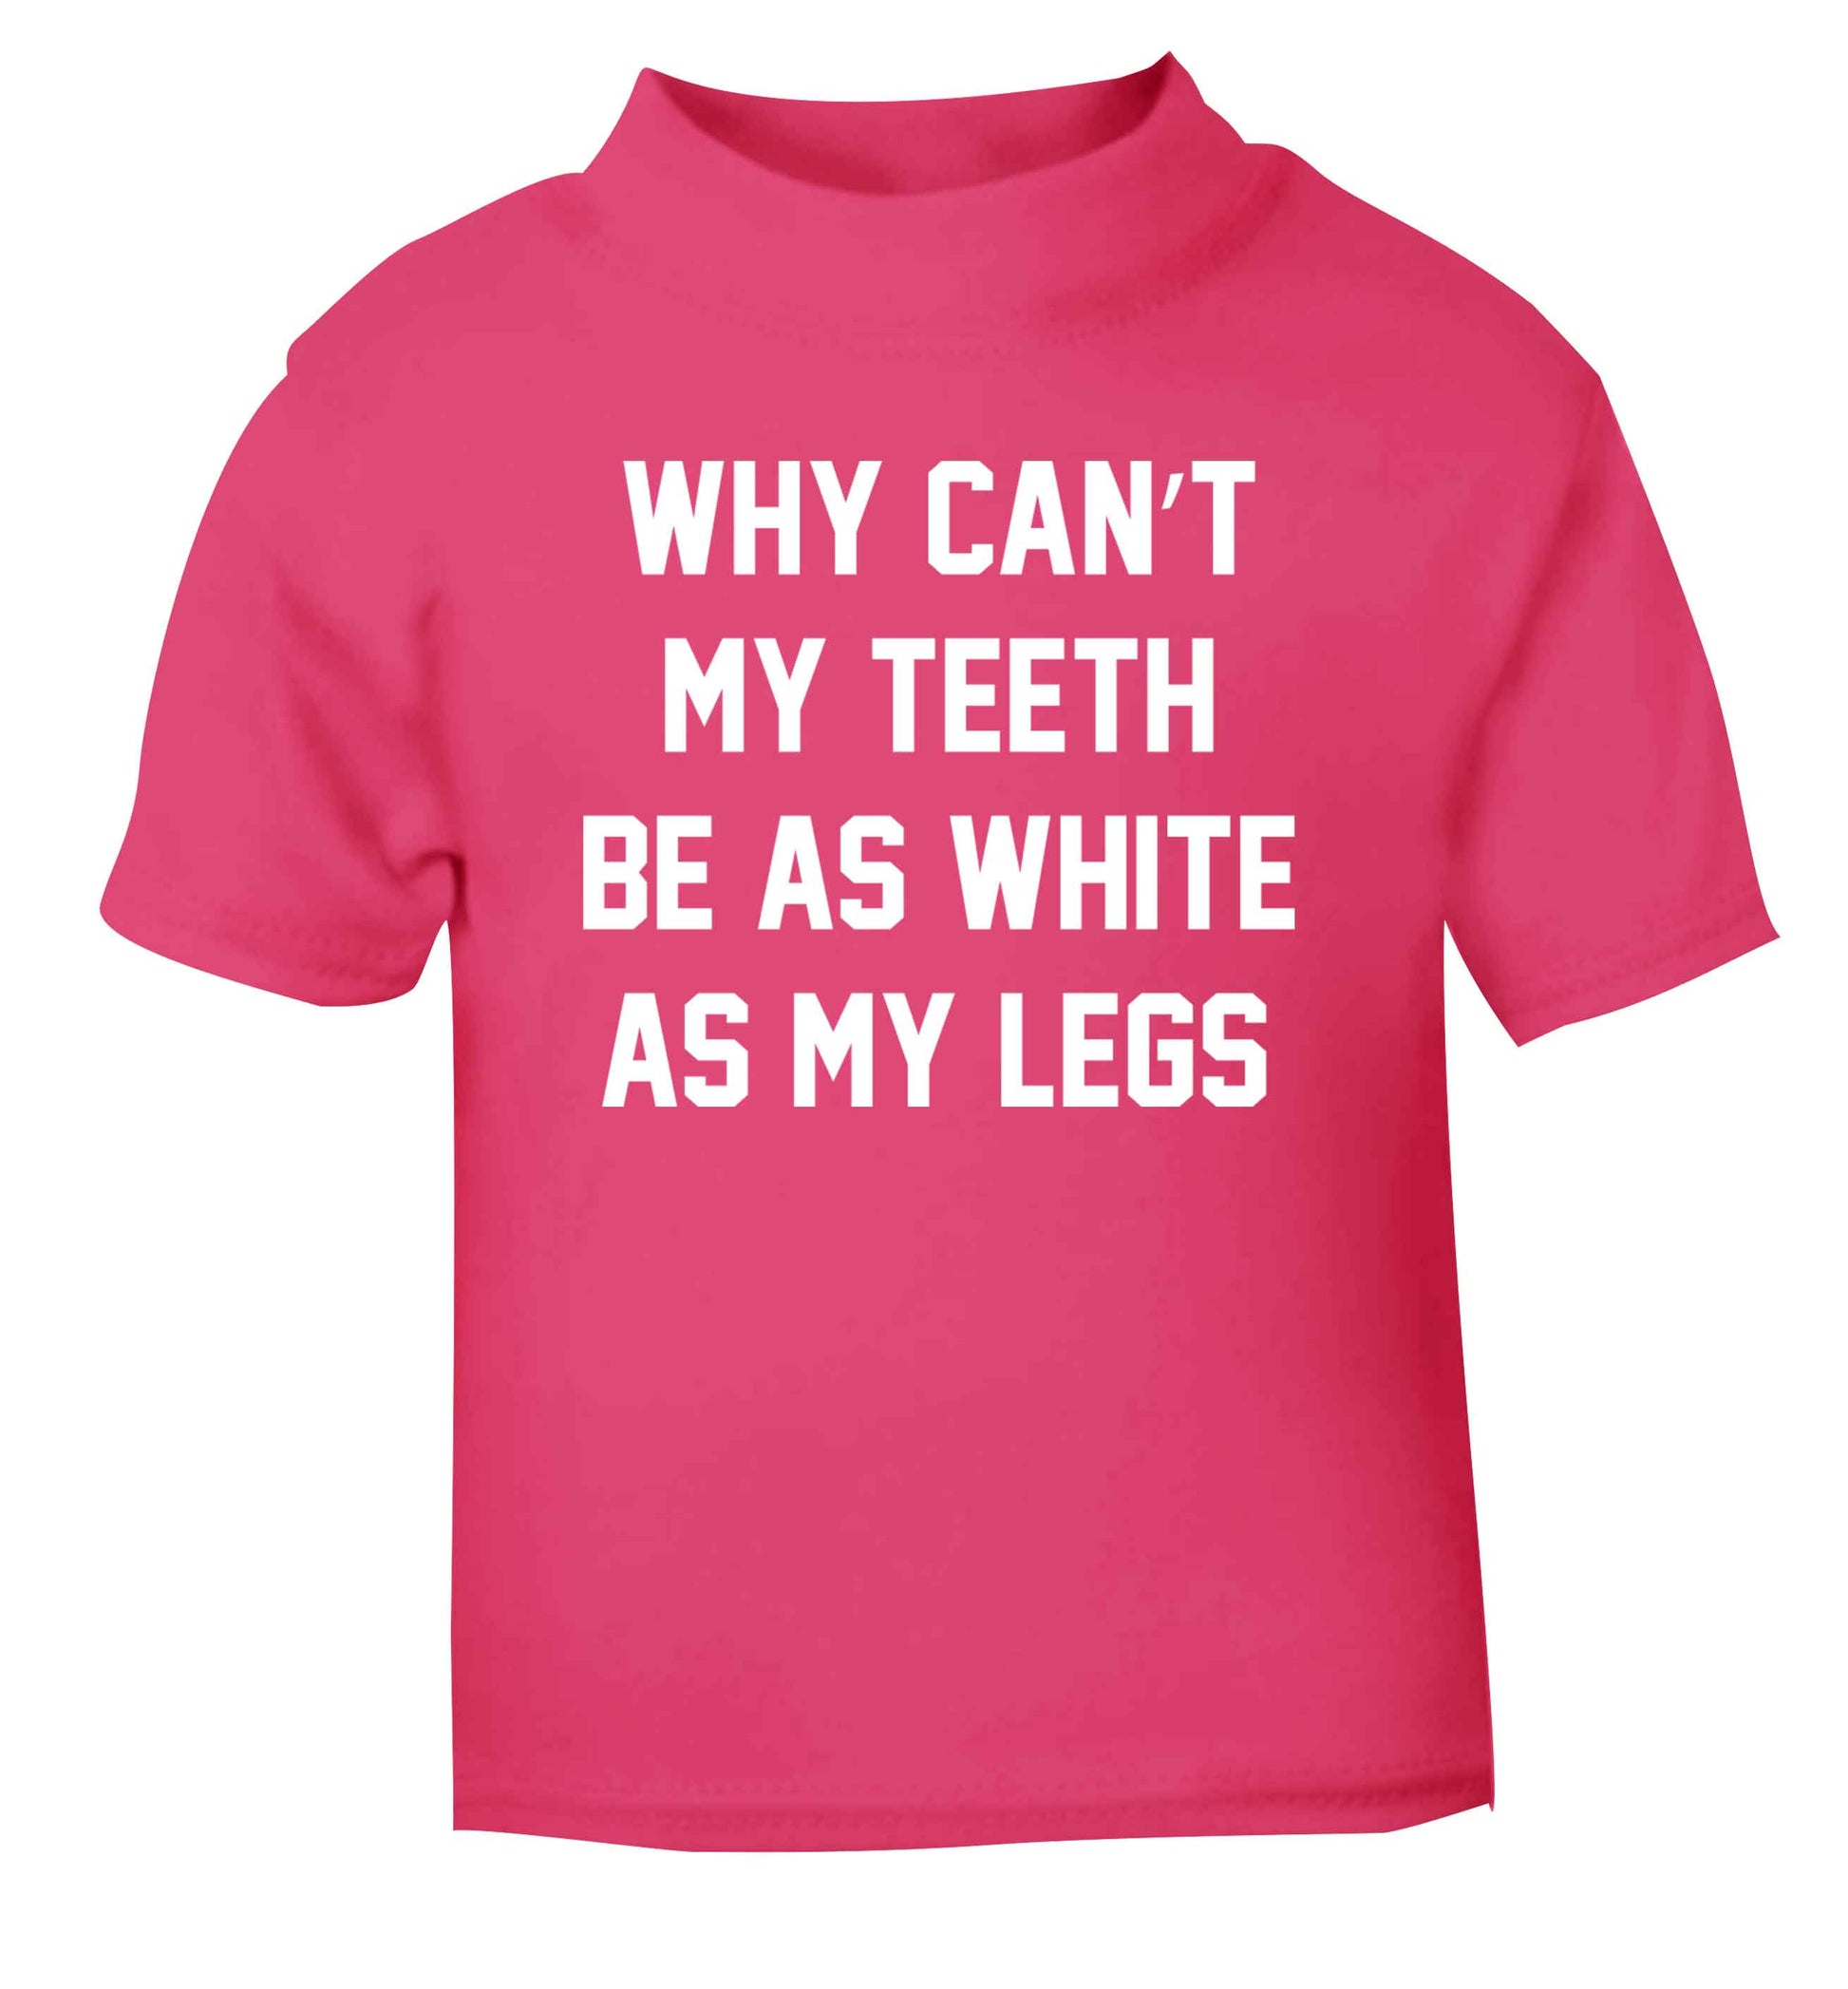 Why can't my teeth be as white as my legs pink Baby Toddler Tshirt 2 Years